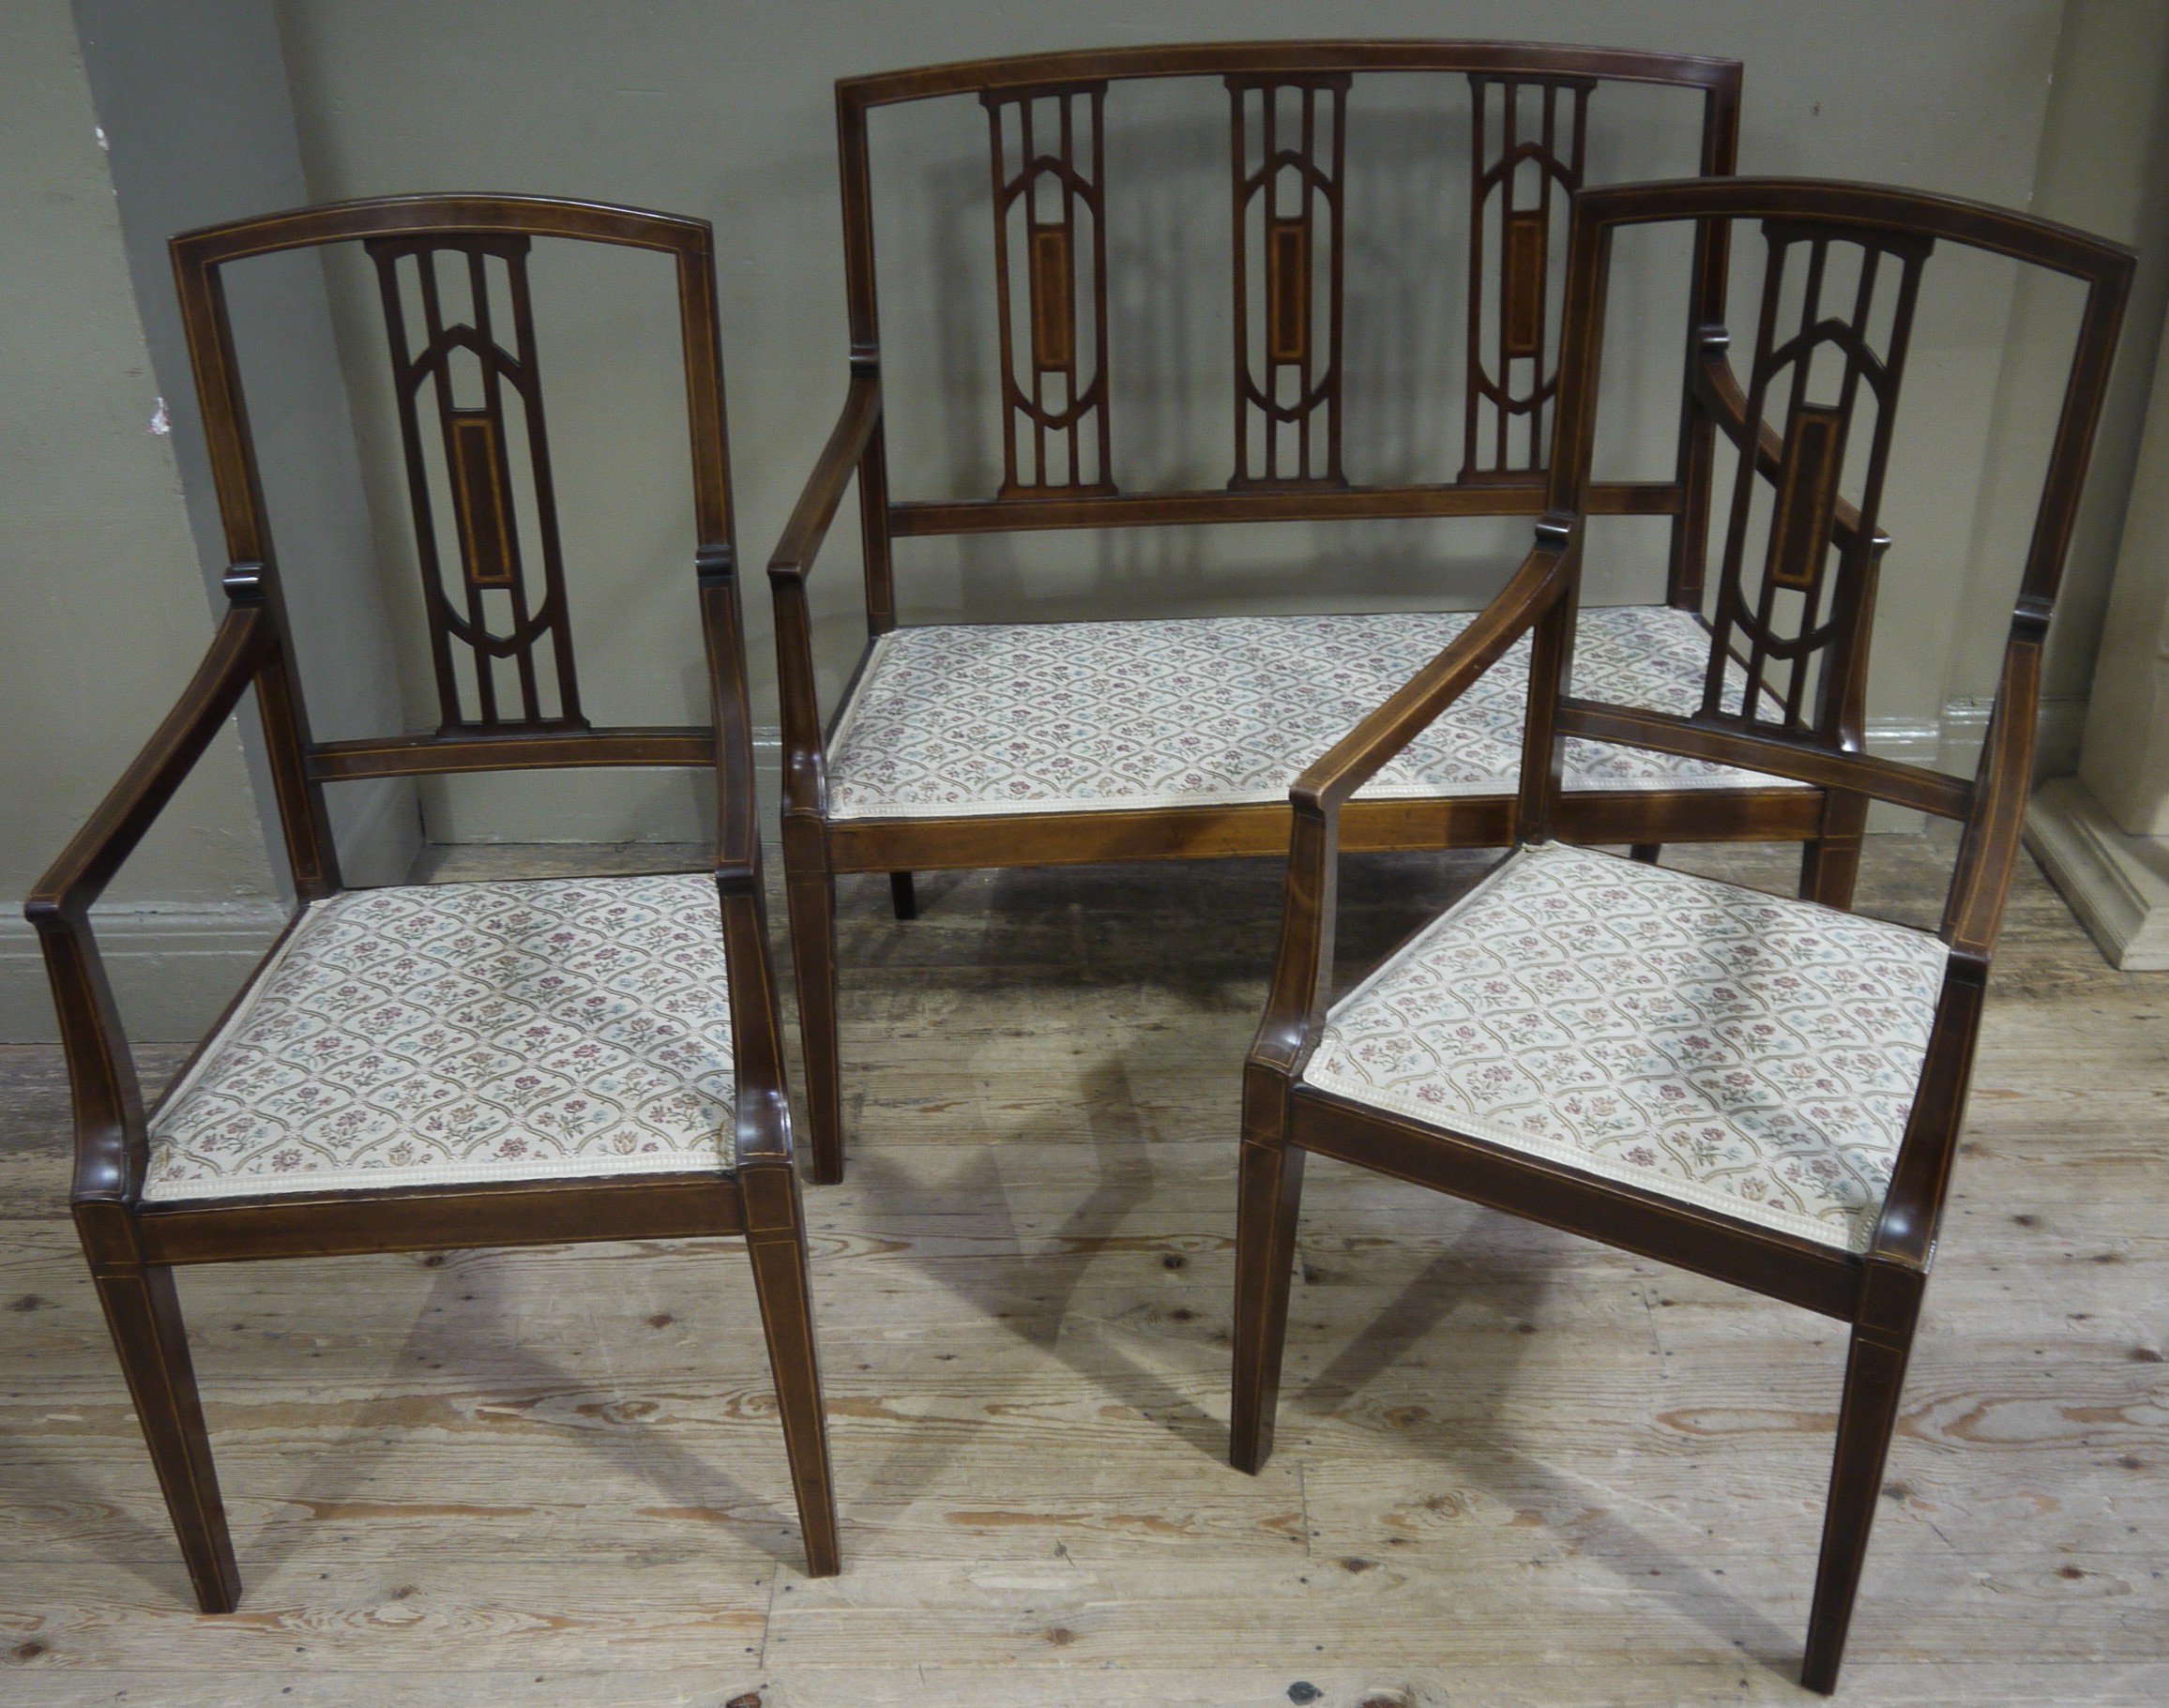 An Edwardian mahogany occasional settee and pair of chairs having pierced vertical splats - Image 2 of 2